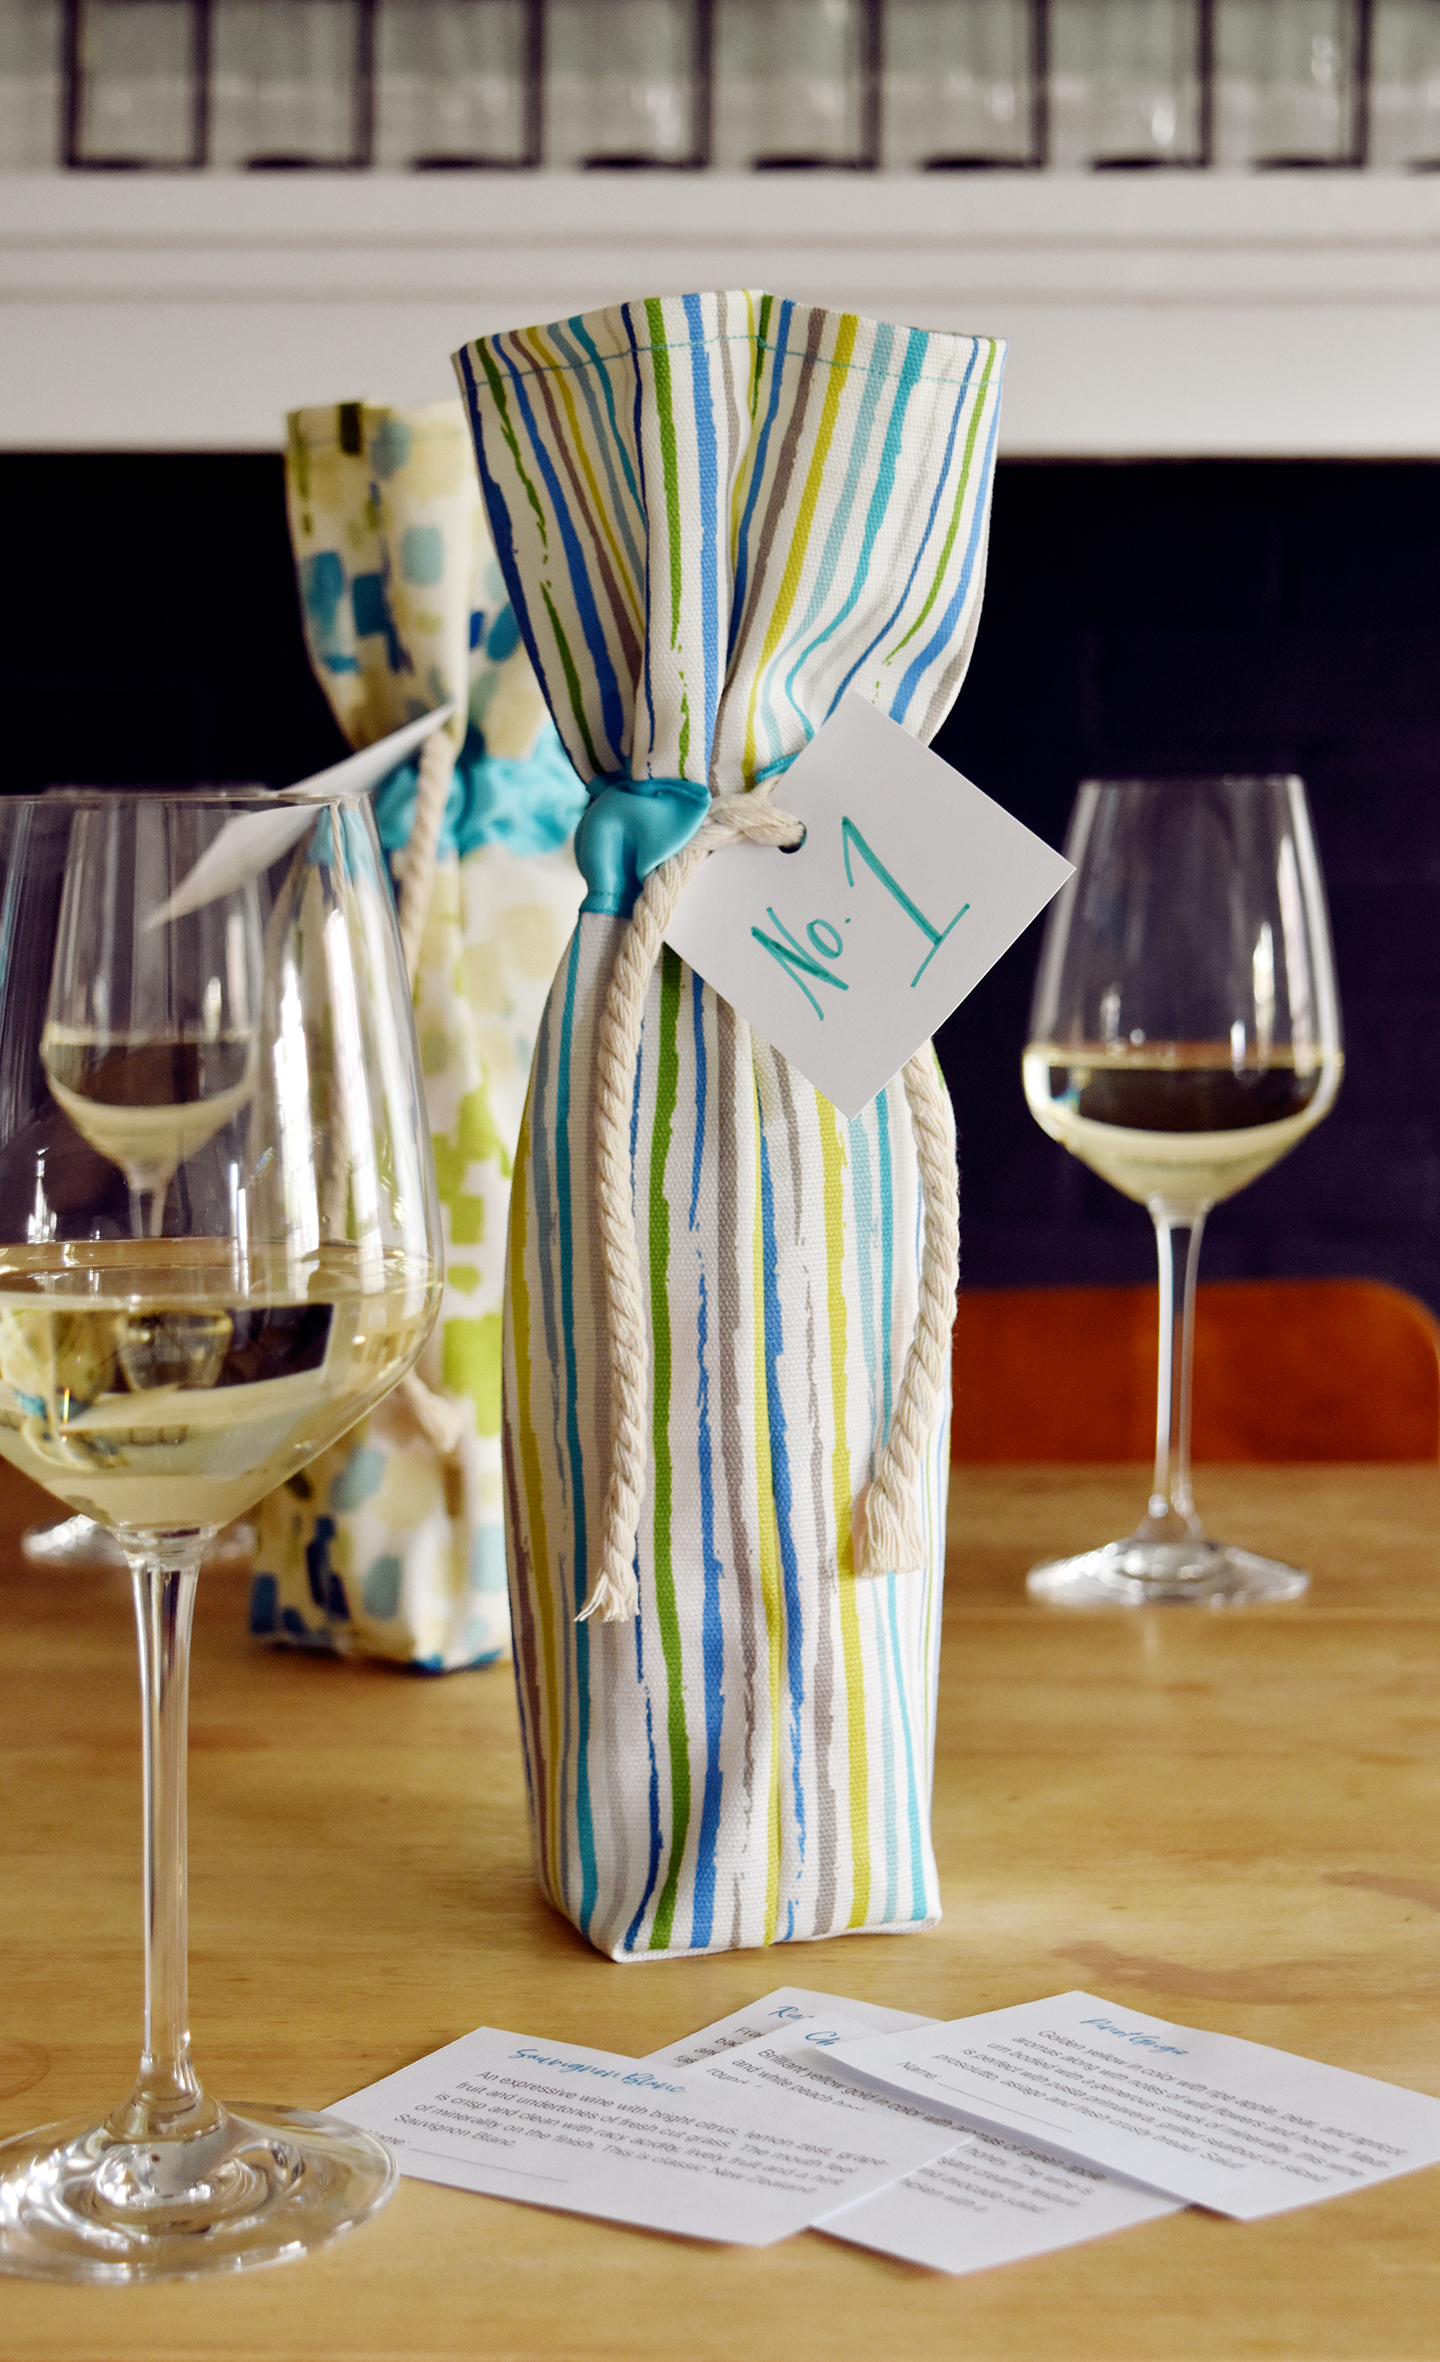 DIY Wine Bag Sewing Tutorial + Blind Tasting Game /// By Faith Towers Provencher of Design Fixation #sew #diy #fabric 